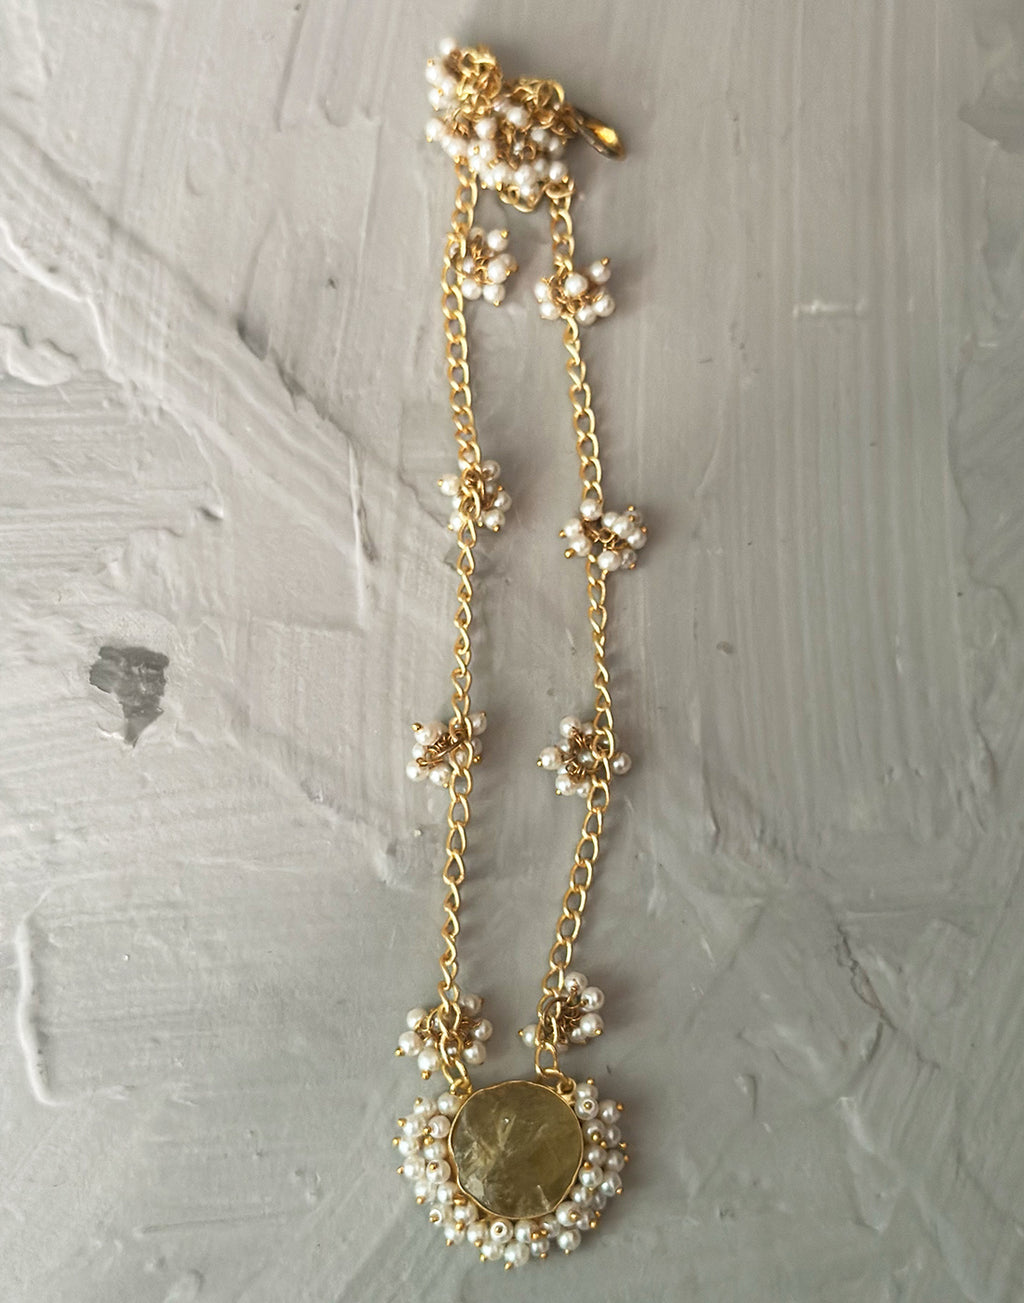 Citrine Tiara Necklace - Statement Necklaces - Gold-Plated & Hypoallergenic Jewellery - Made in India - Dubai Jewellery - Dori